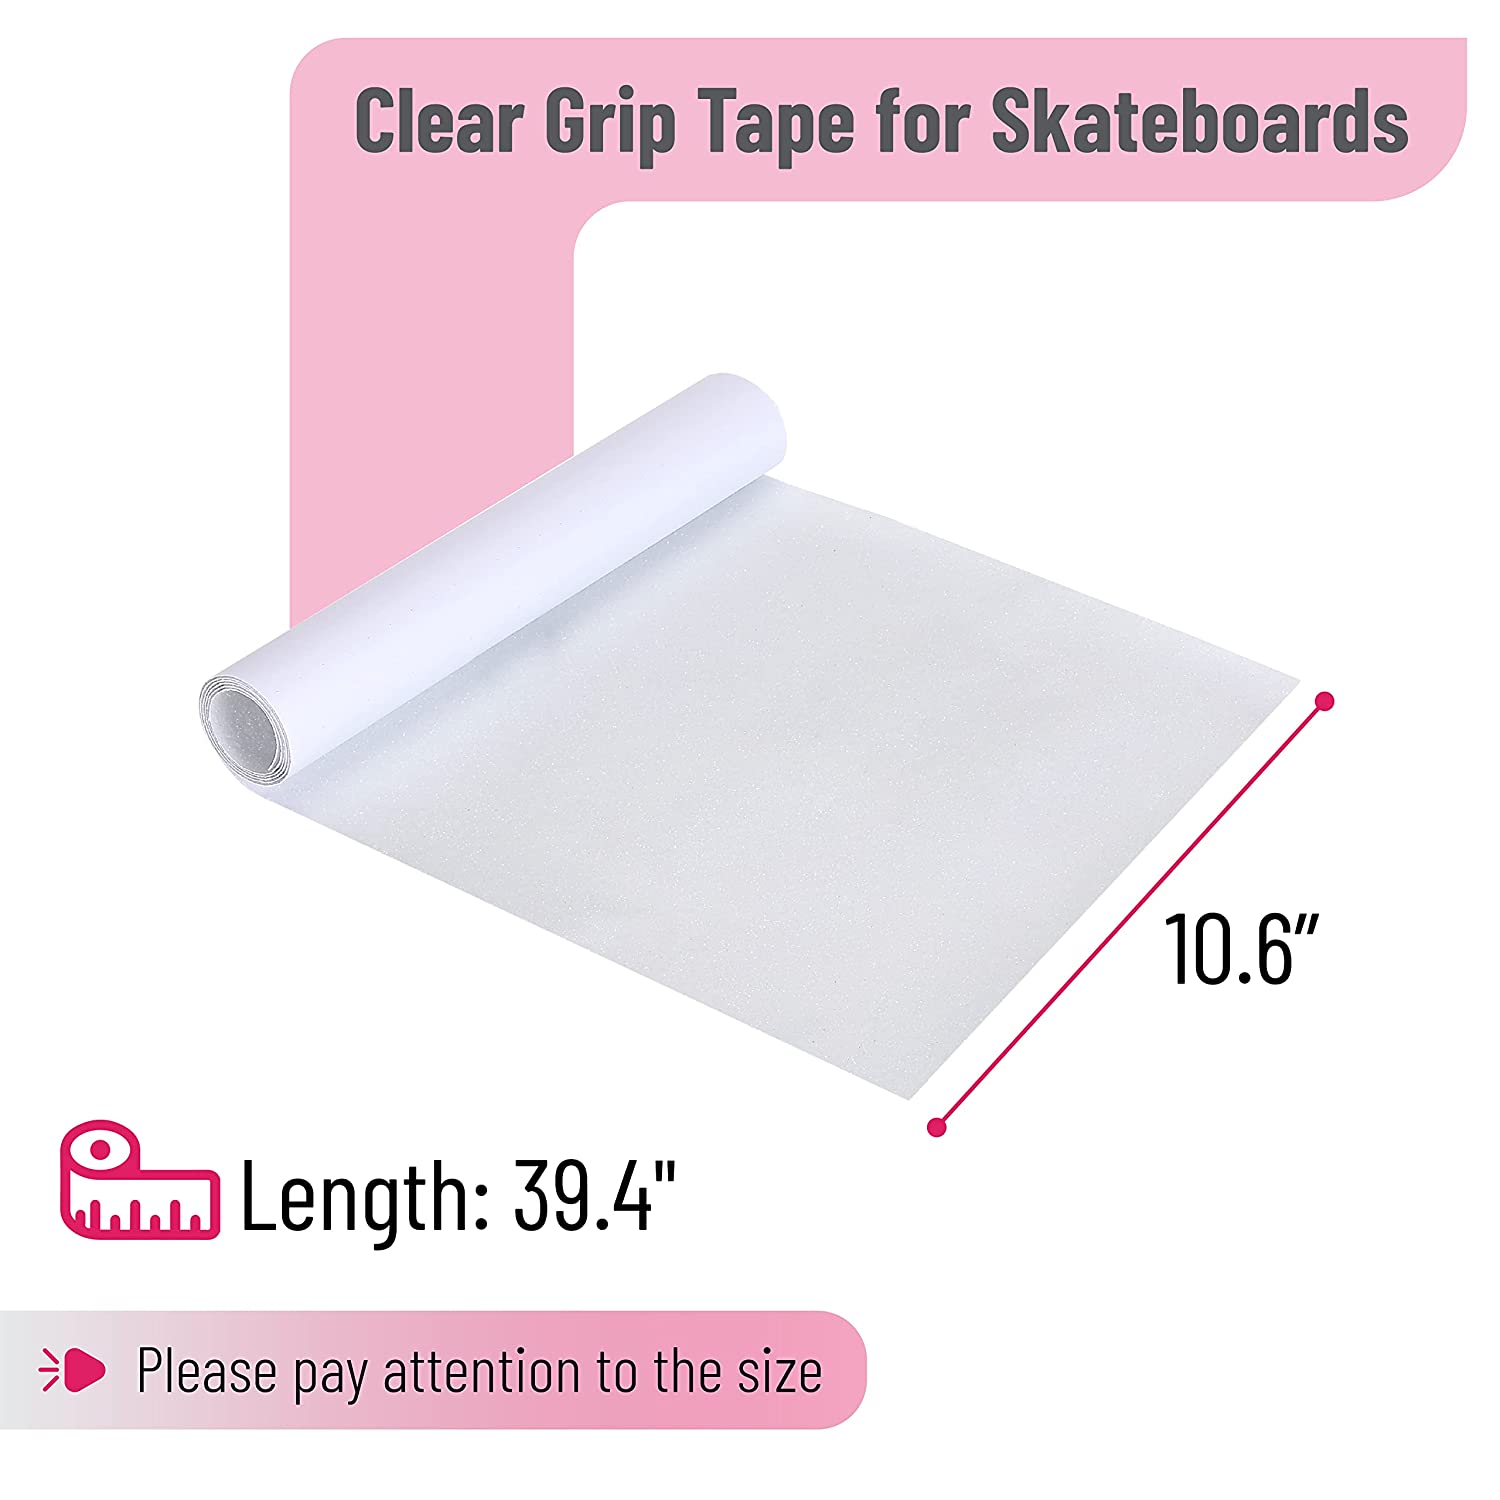 Mr. Pen- Clear Grip Tape for Skateboards, Clear, 39.4 x 10.6, Grip Tape,  Skateboard Grip Tape, Scooter Grip Tape 